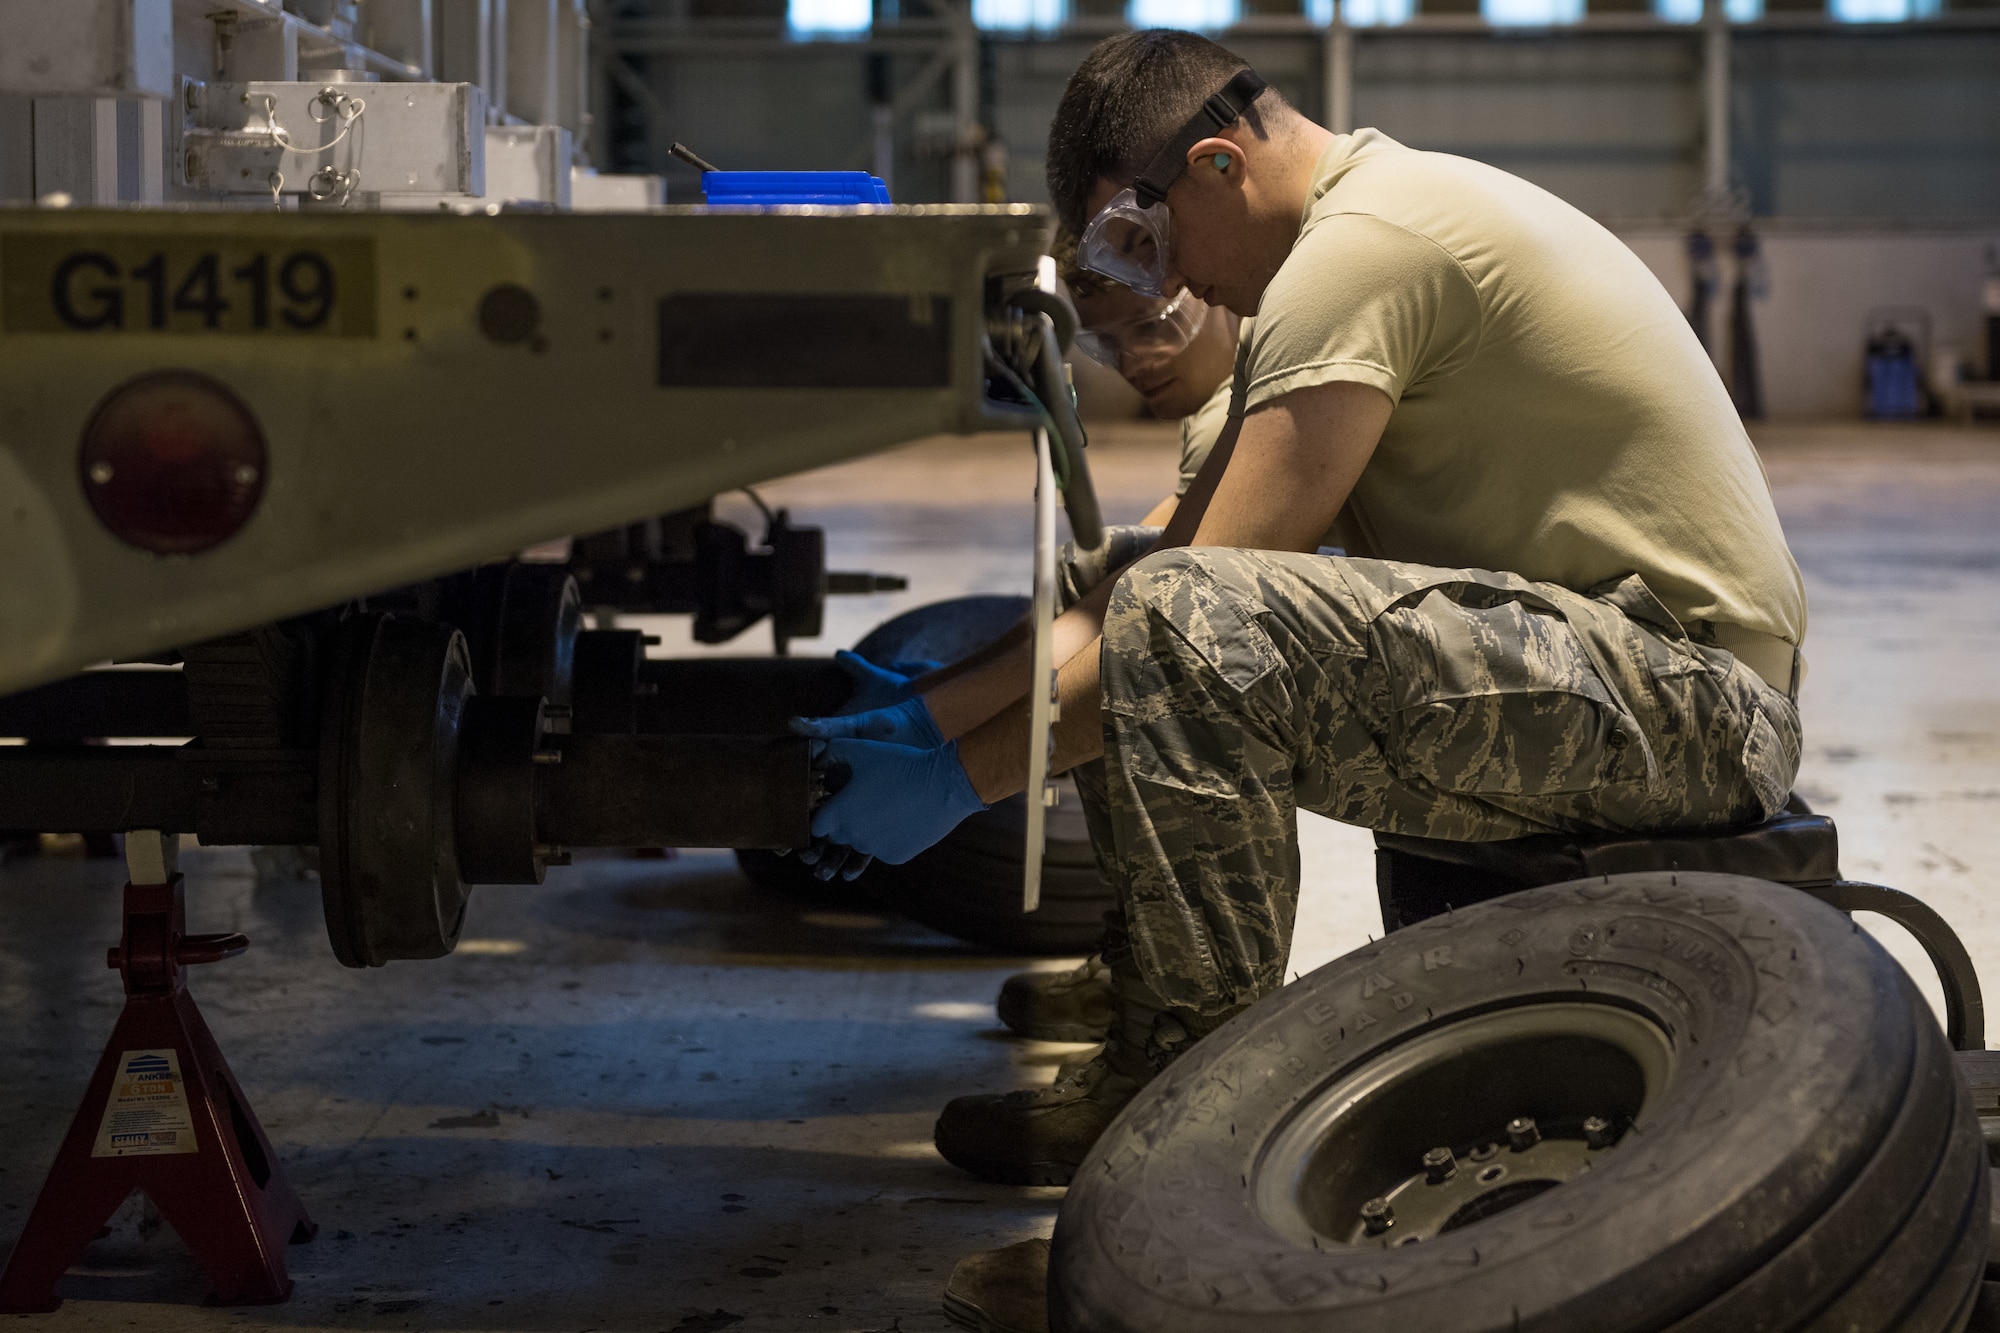 Airman 1st Class Landon Gonzales, 2nd Munitions Squadron conventional maintenance crew chief, replaces a hub on a MHU-110 munitions trailer during a U.S. Strategic Command Bomber Task Force in Europe at RAF Fairford, England, April 2, 2019. The 2nd MUNS brought Airmen for their primary duties and extra Airmen for the additional jobs such as the trailer maintenance. (U.S. Air Force photo by Airman 1st Class Tessa B. Corrick)